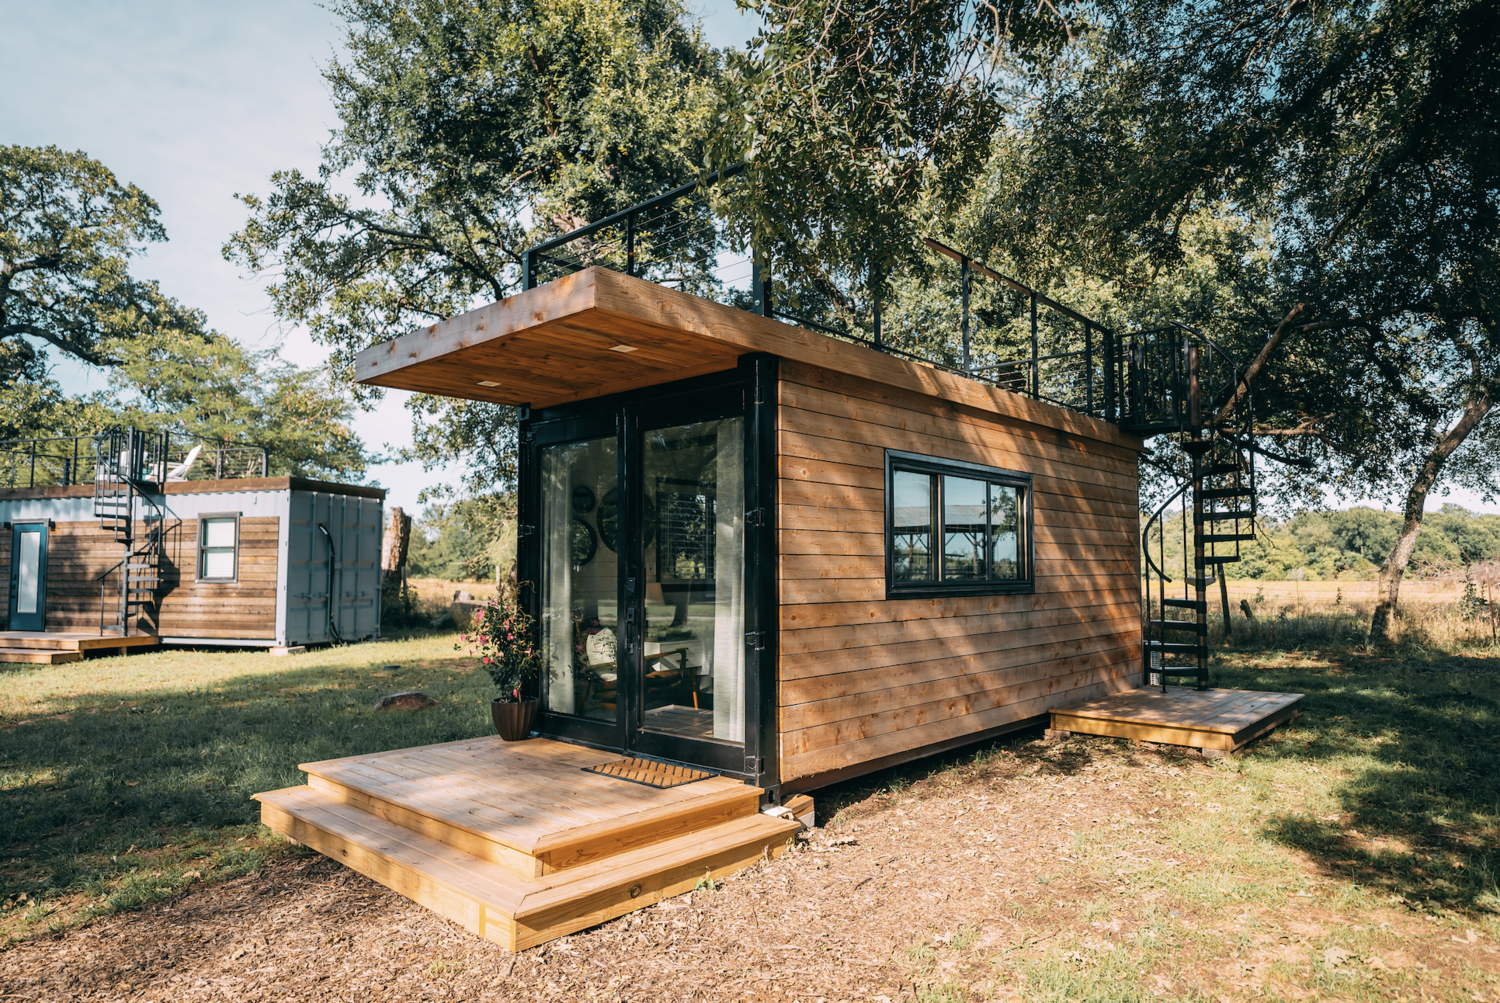 Sells DIY Tiny-Home Kits That Take Only 2 Days to Build